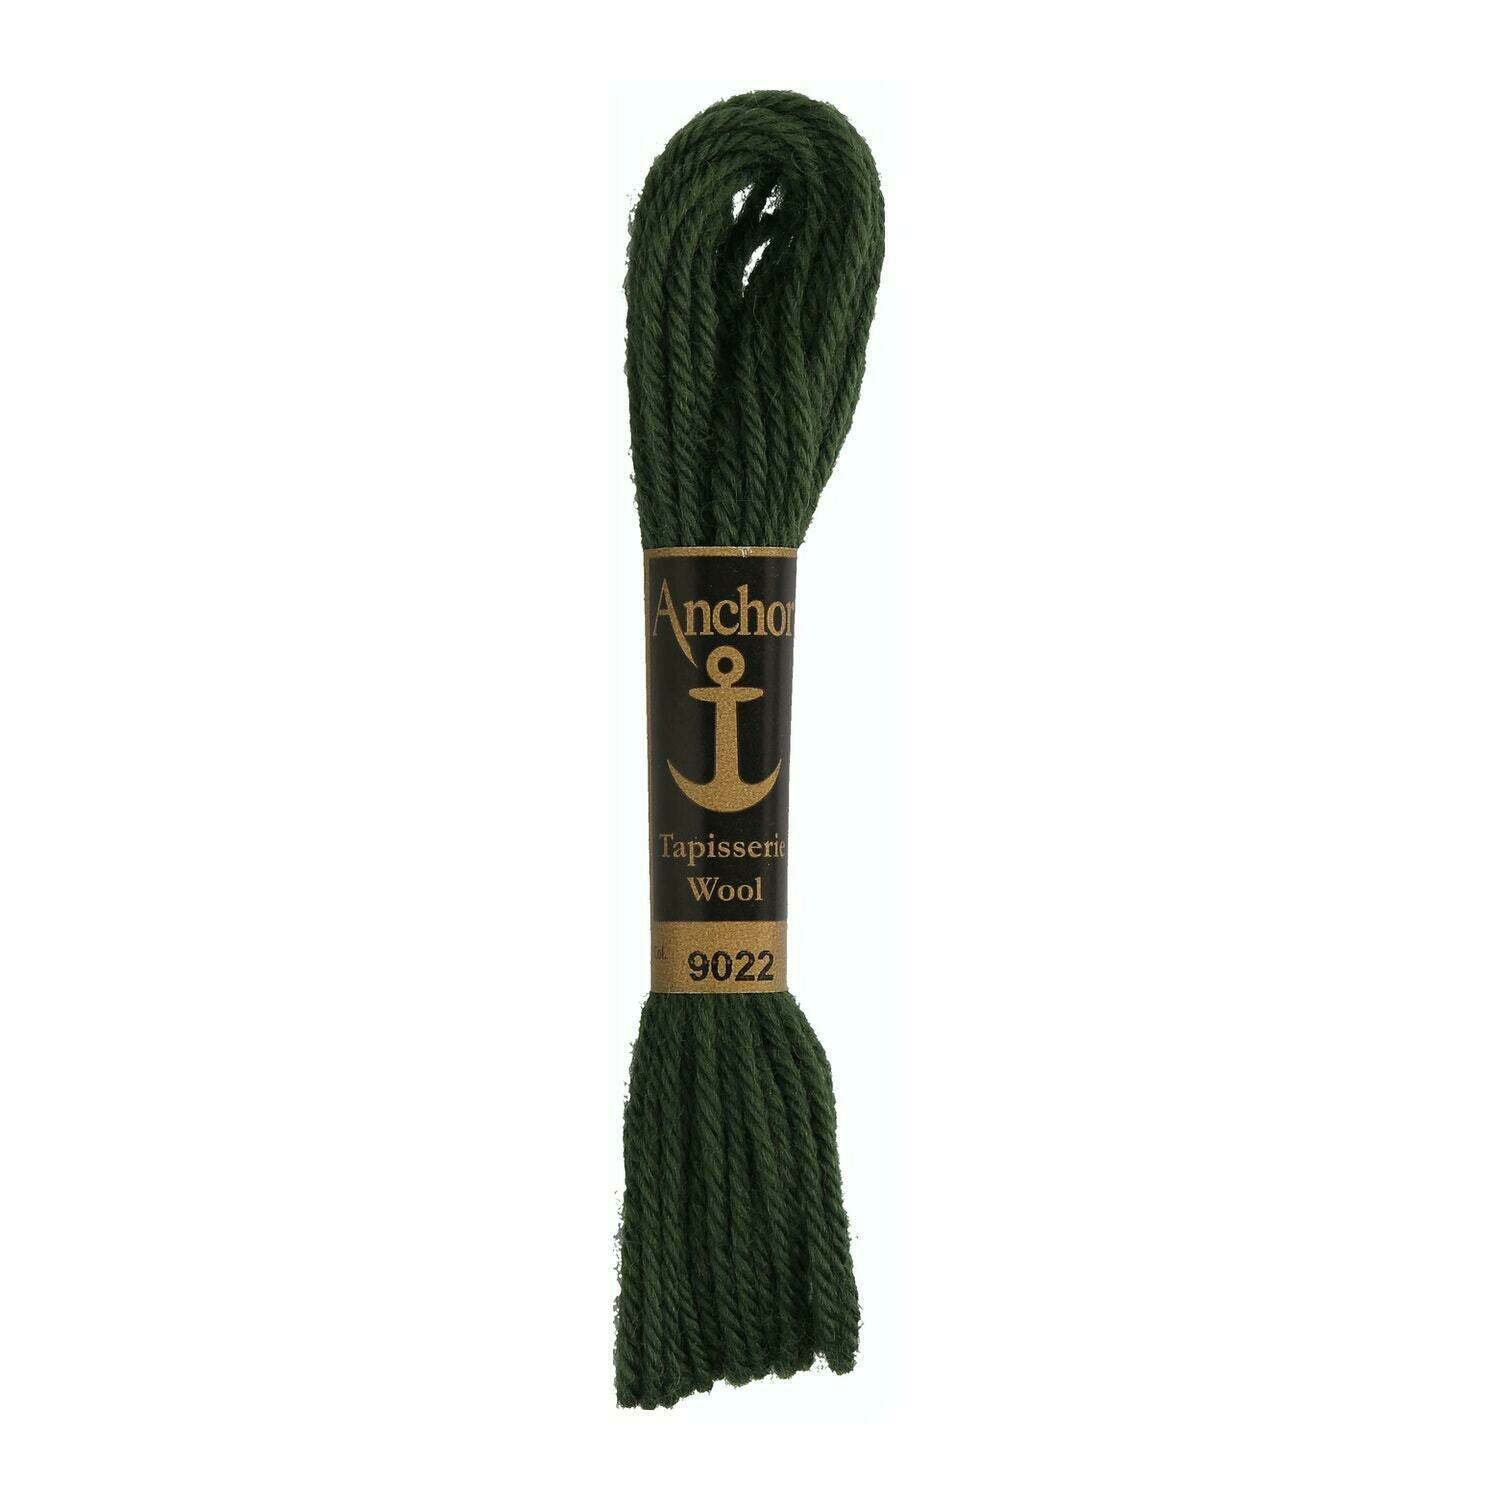 Anchor Tapisserie Wool #09022